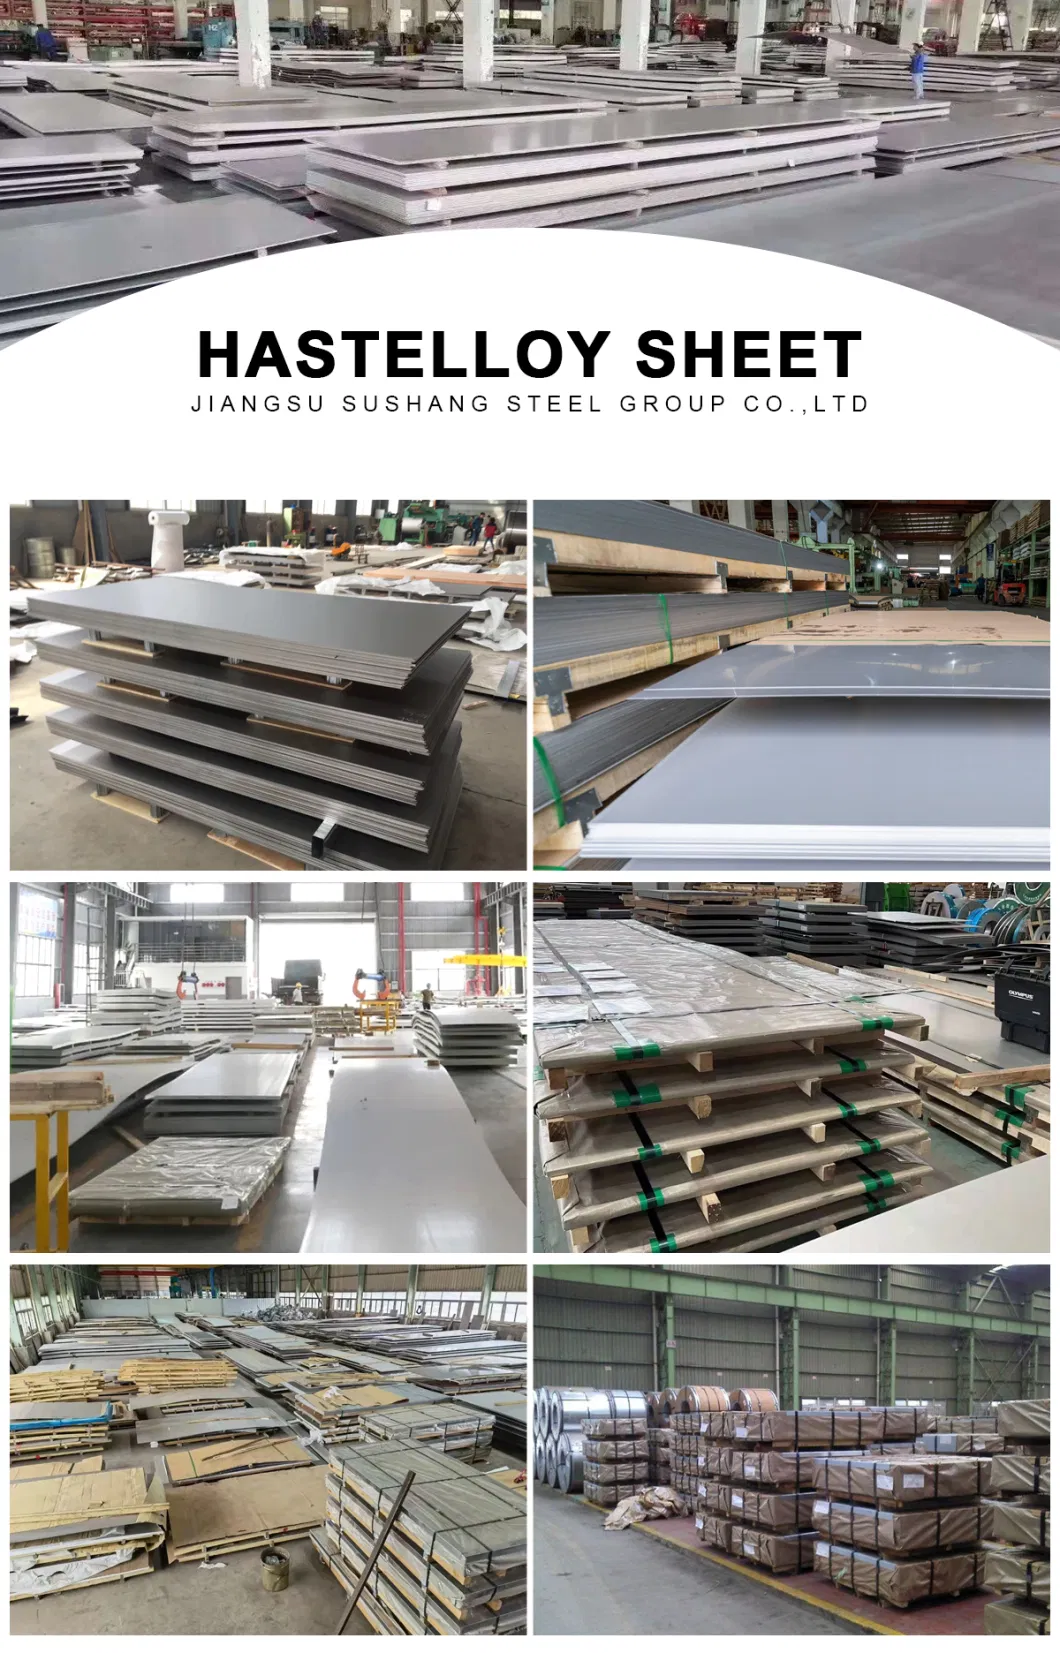 Nickel Alloy Metal Plate Inconel 600/625/718/725, Hastelloy B2/X/C/C22/C276/G-30, Incoloy 800/800h/825/925